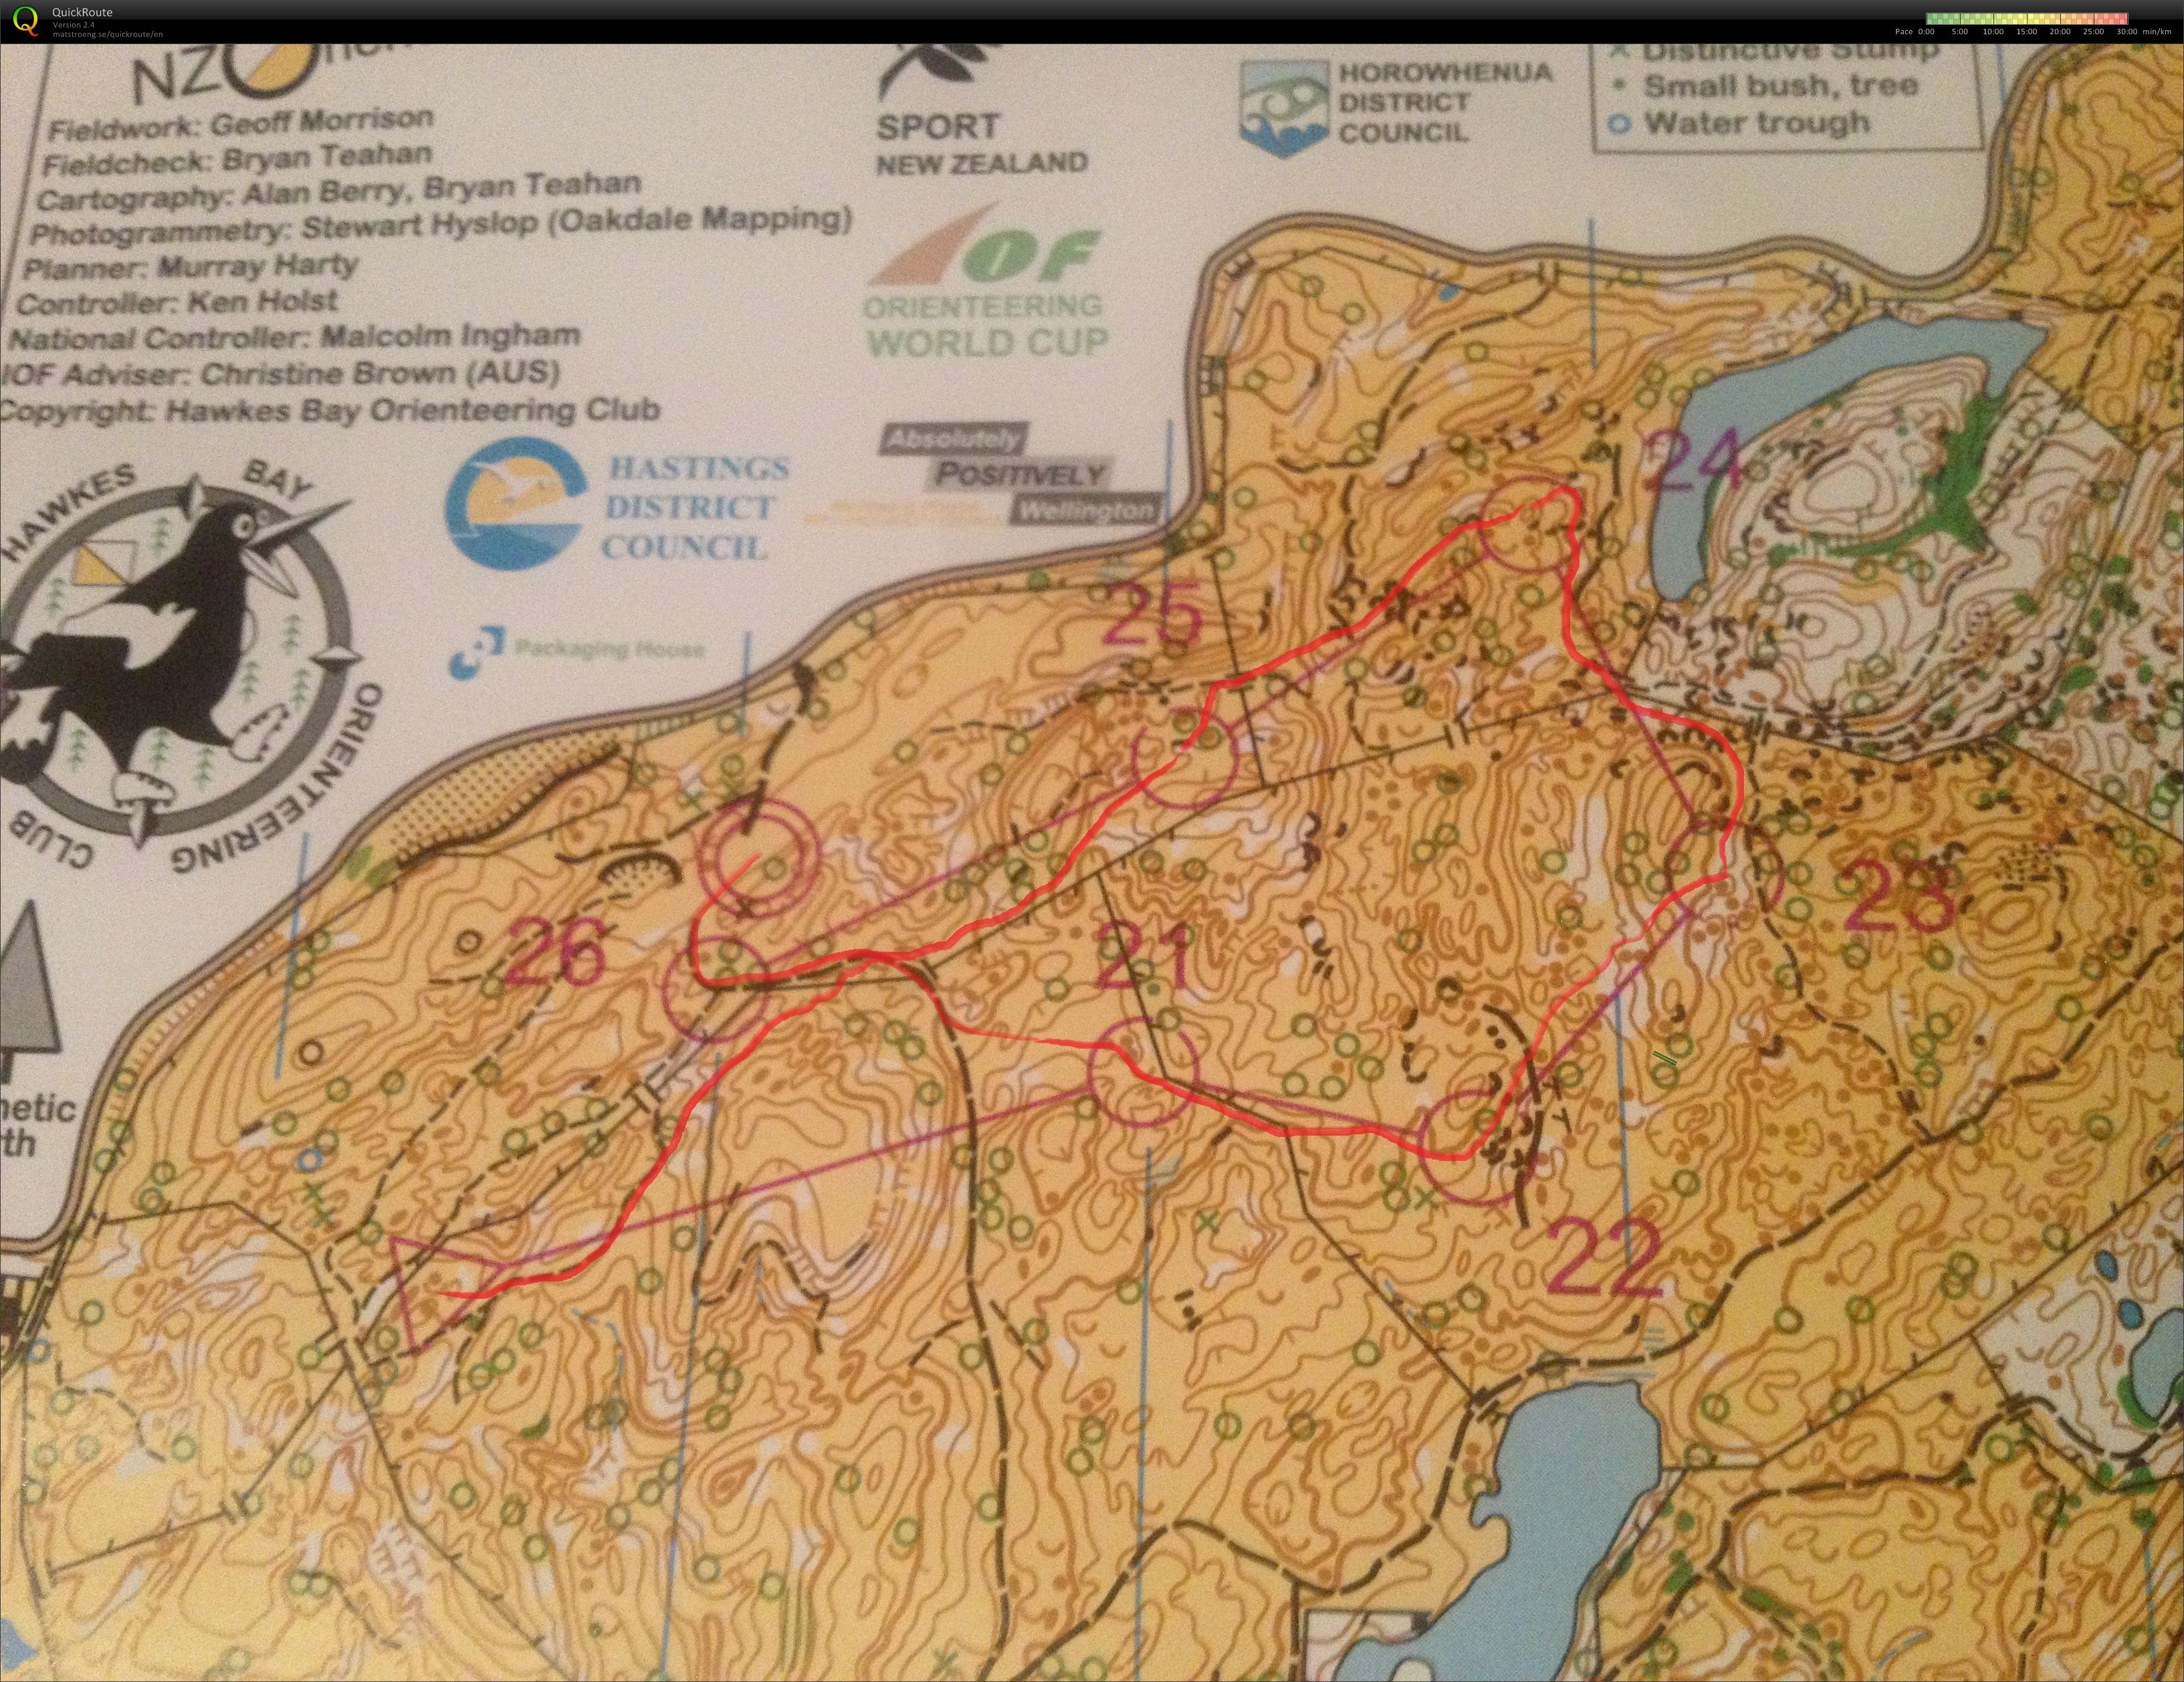 2013 World Cup 3 Chasing Start Map 2 (2013-01-13)